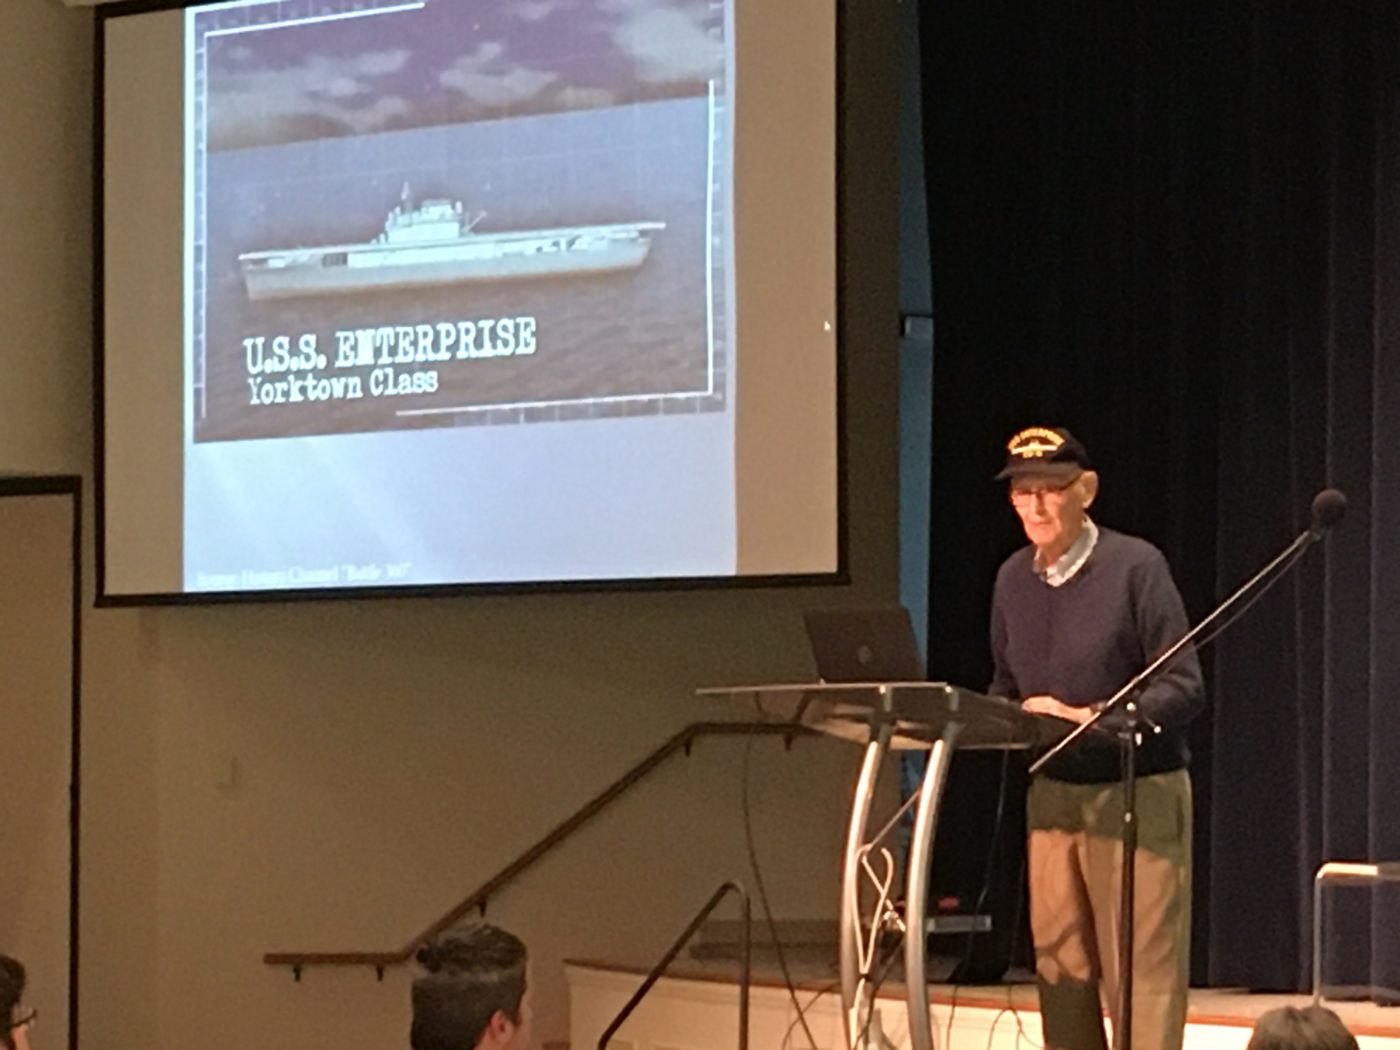 Bill Norberg and a photo of the USS Enterprise.